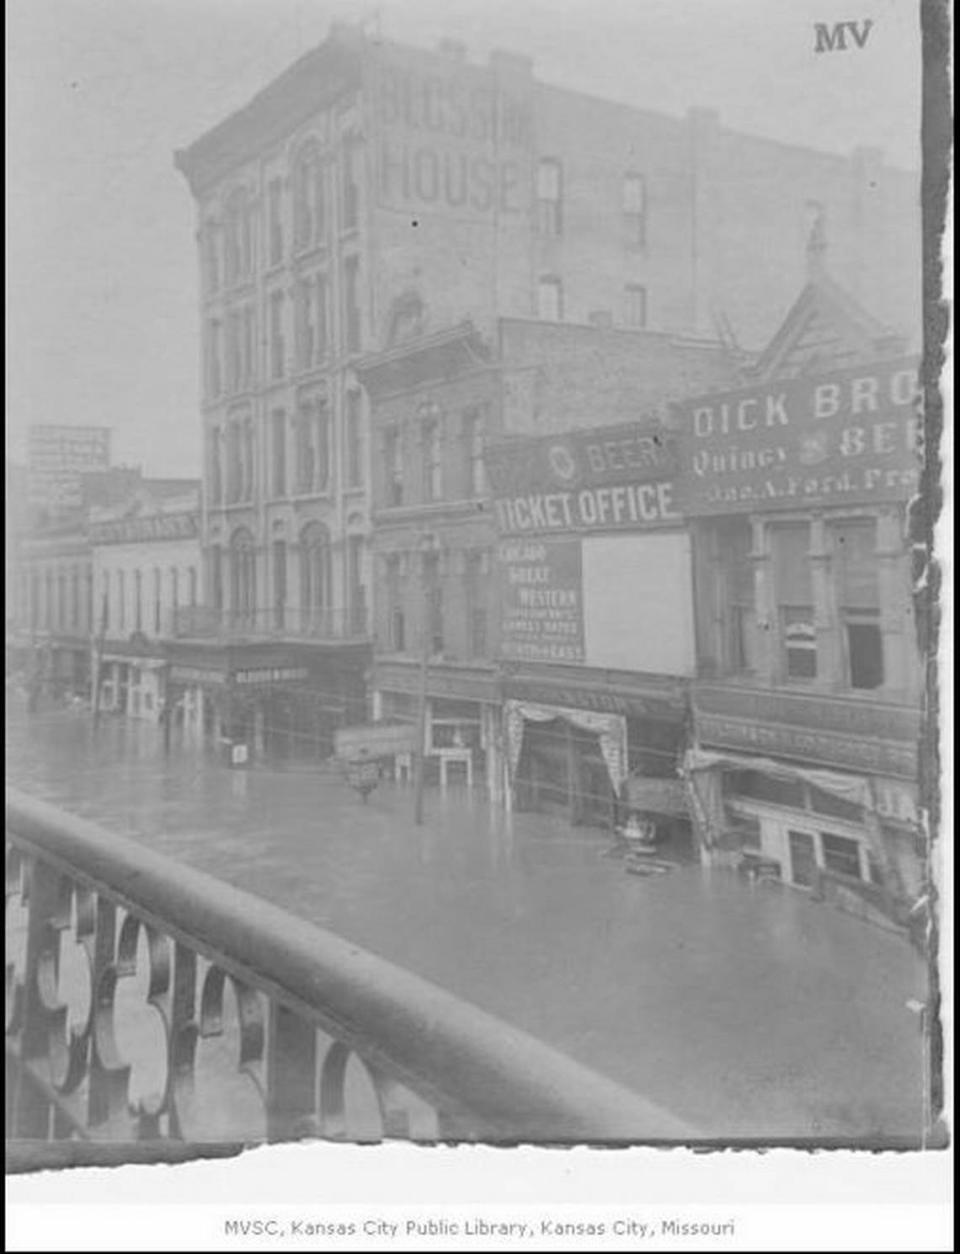 The actual Blossom House Hotel, seen here during the 1903 flood, was located on Union Avenue, not Santa Fe Street. It closed and in 1920 was dismantled.